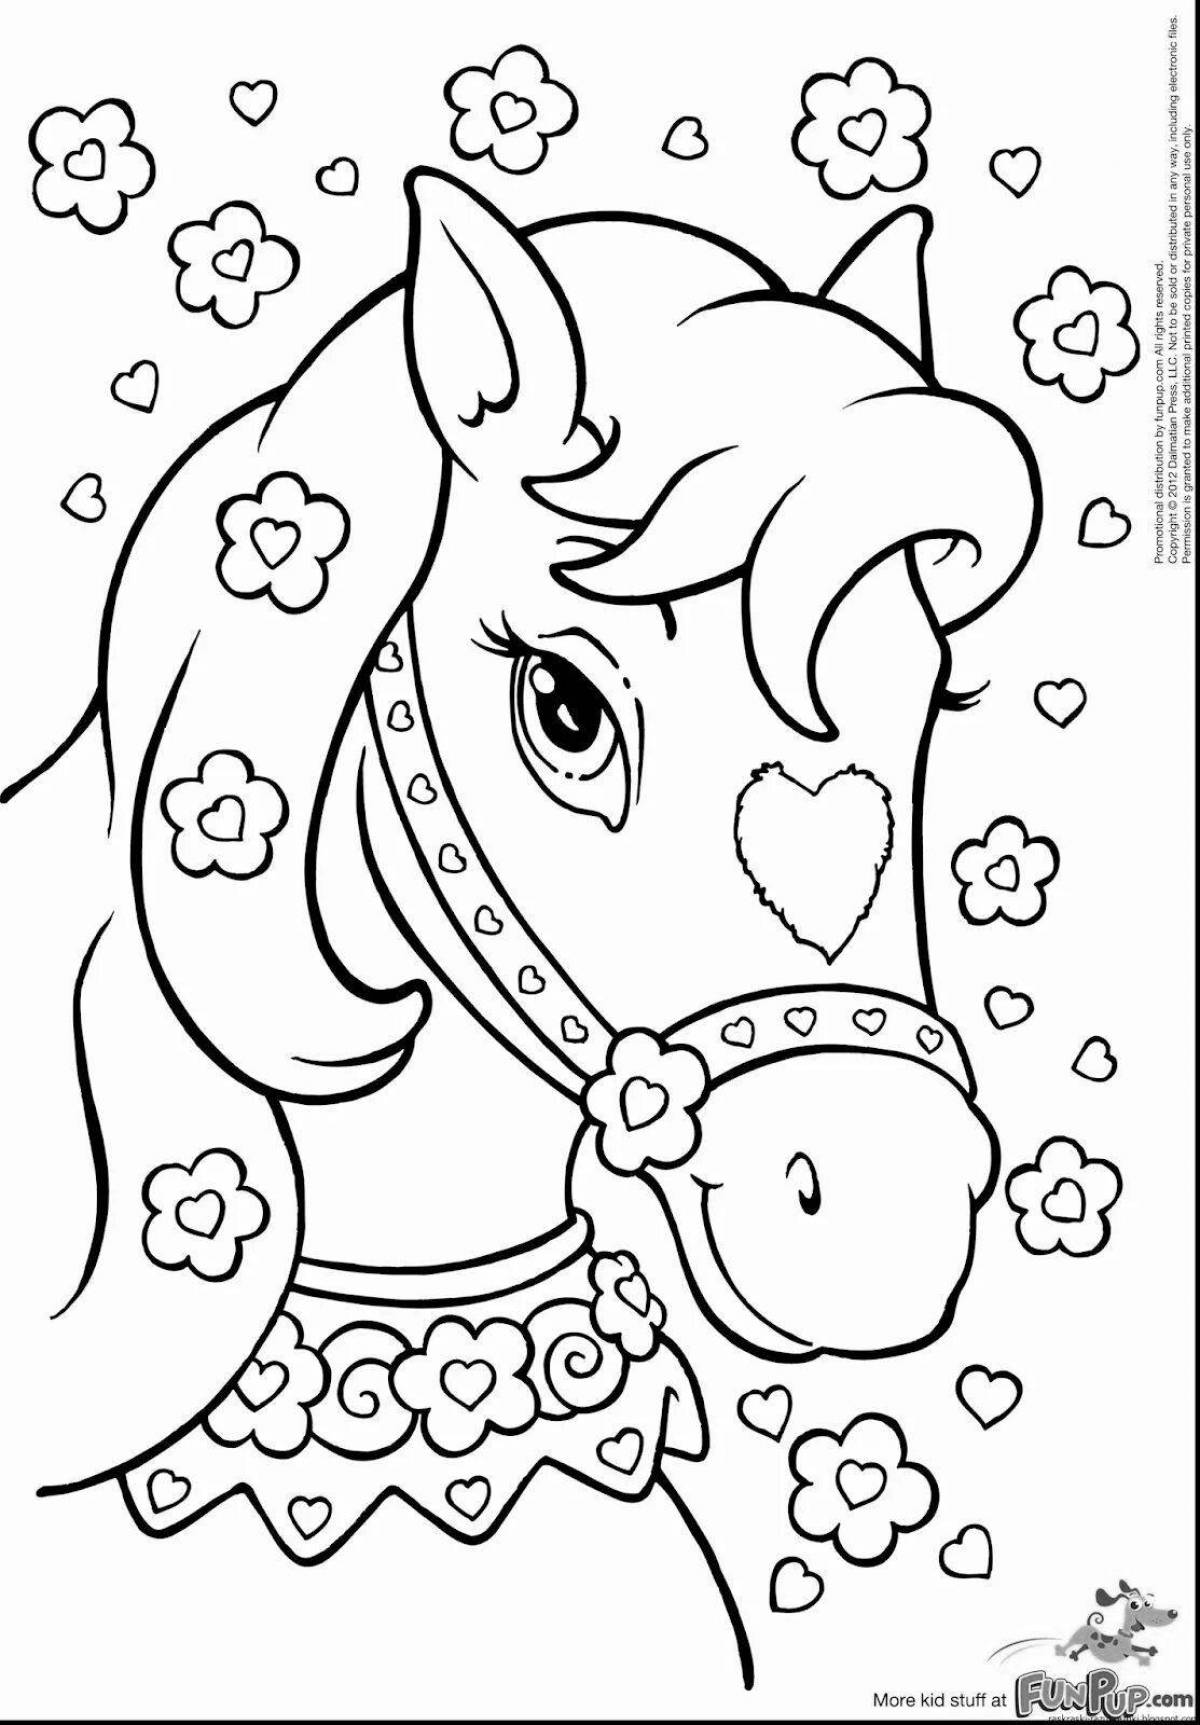 Amazing coloring book for girls